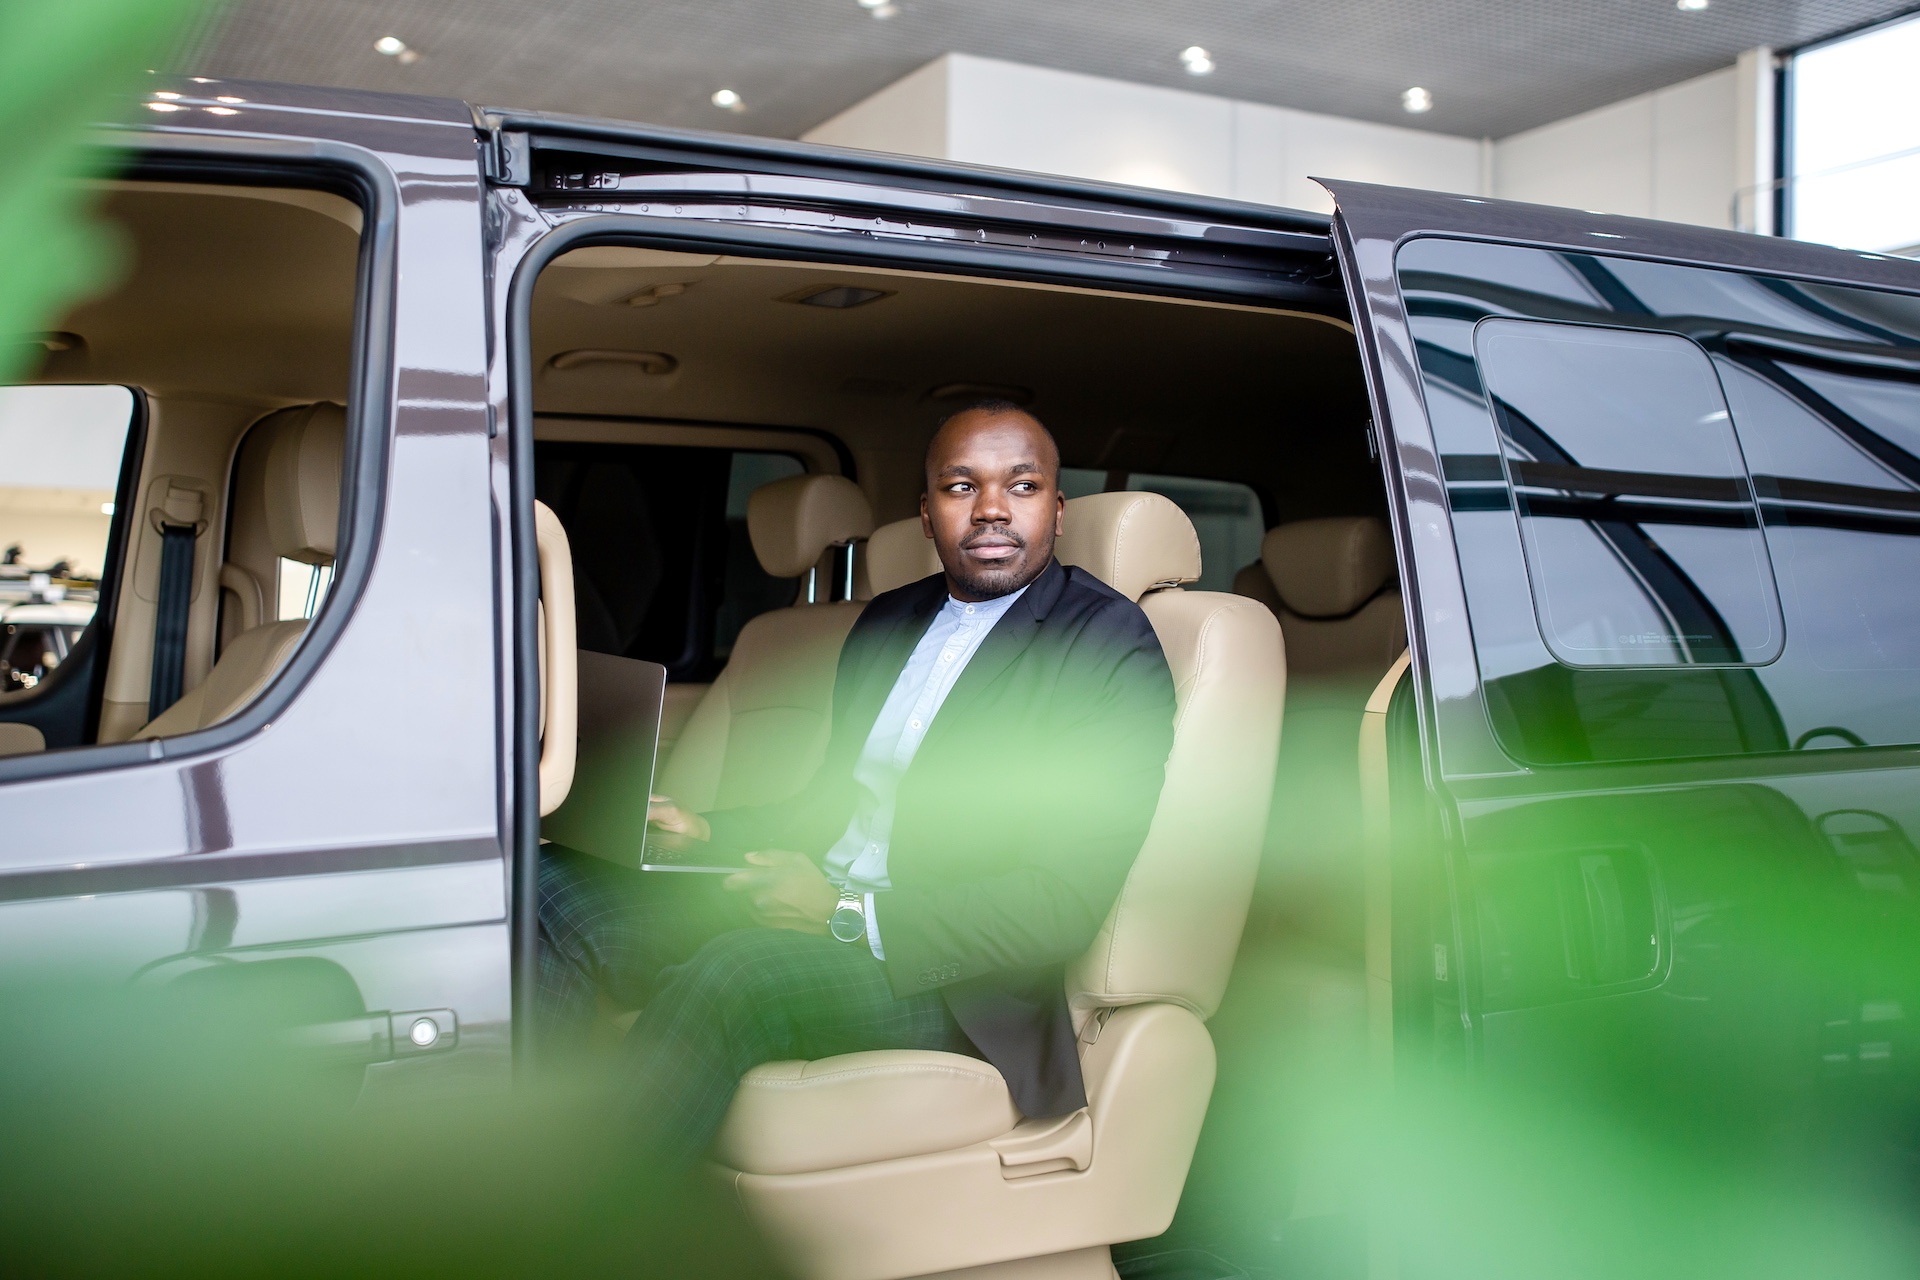 Black male businessman sitting in the passenger seat of a car in a luxury sprinter van.